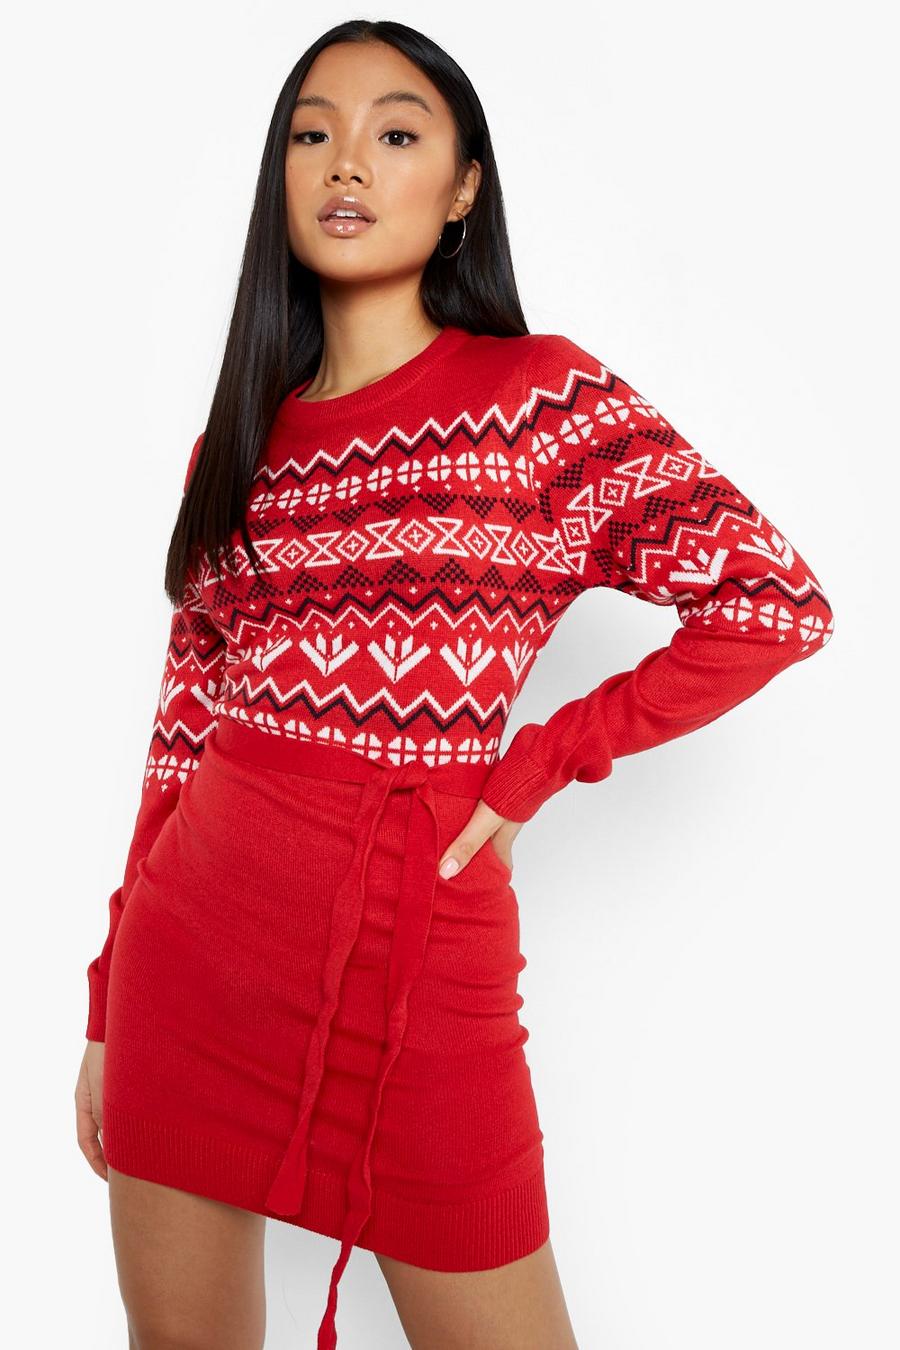 Red Petite Belted Knitted Christmas Jumper Dress image number 1